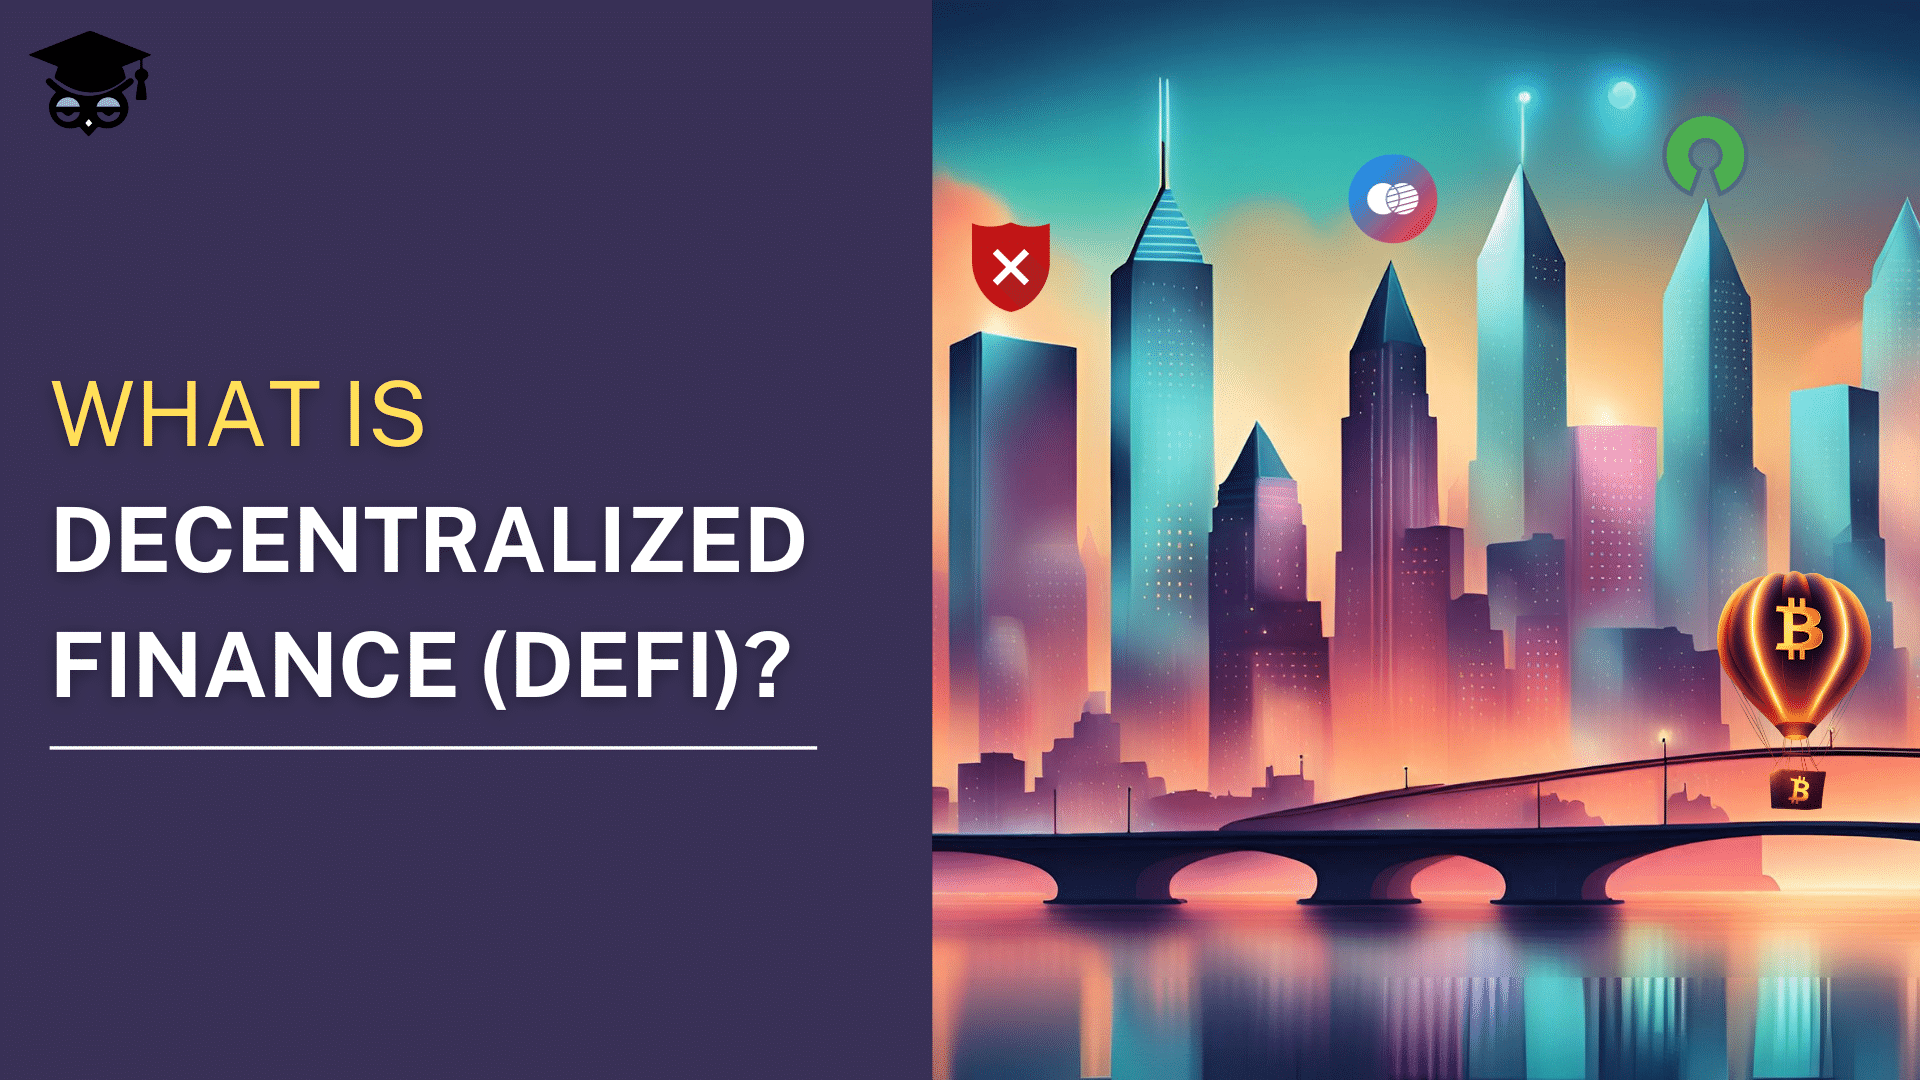 What is decentralized finance